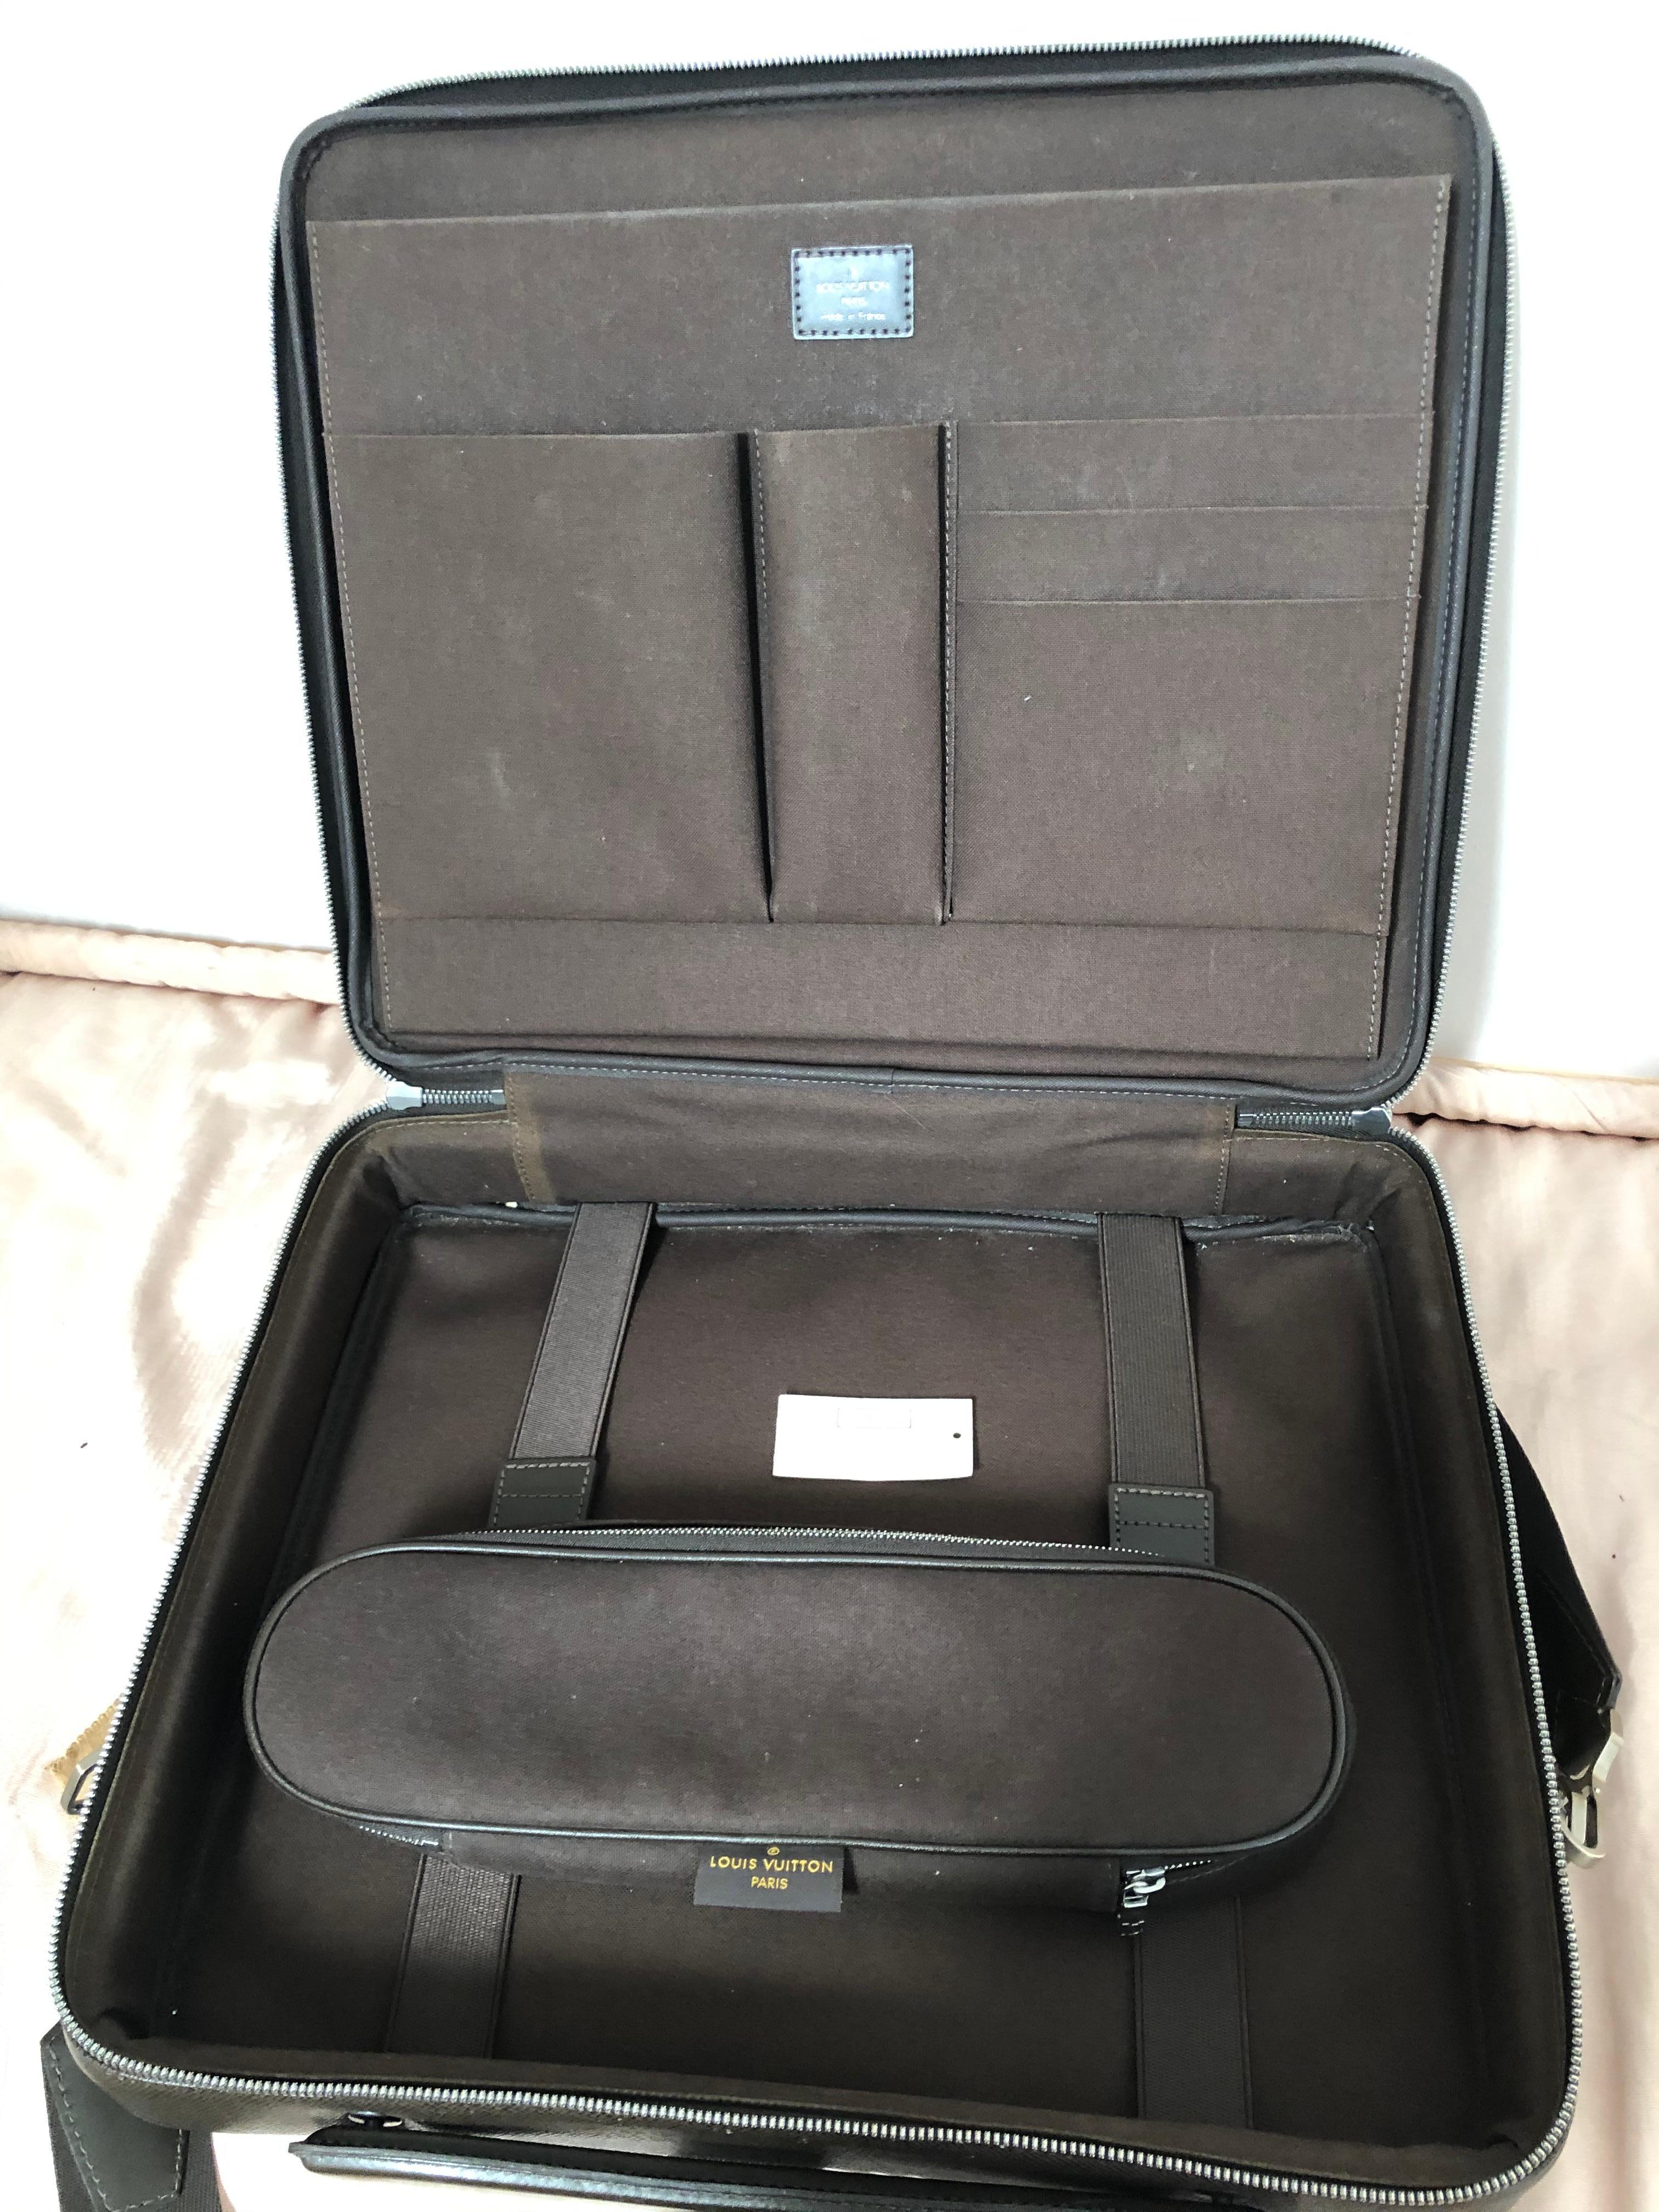 This briefcase, with many pockets and pencil/pen etc pouch, can old all your documents and an Ipad or small laptop. It is in very good condition with a few minor scratches and has both a handle and detachable strap.

The dust bag is included.